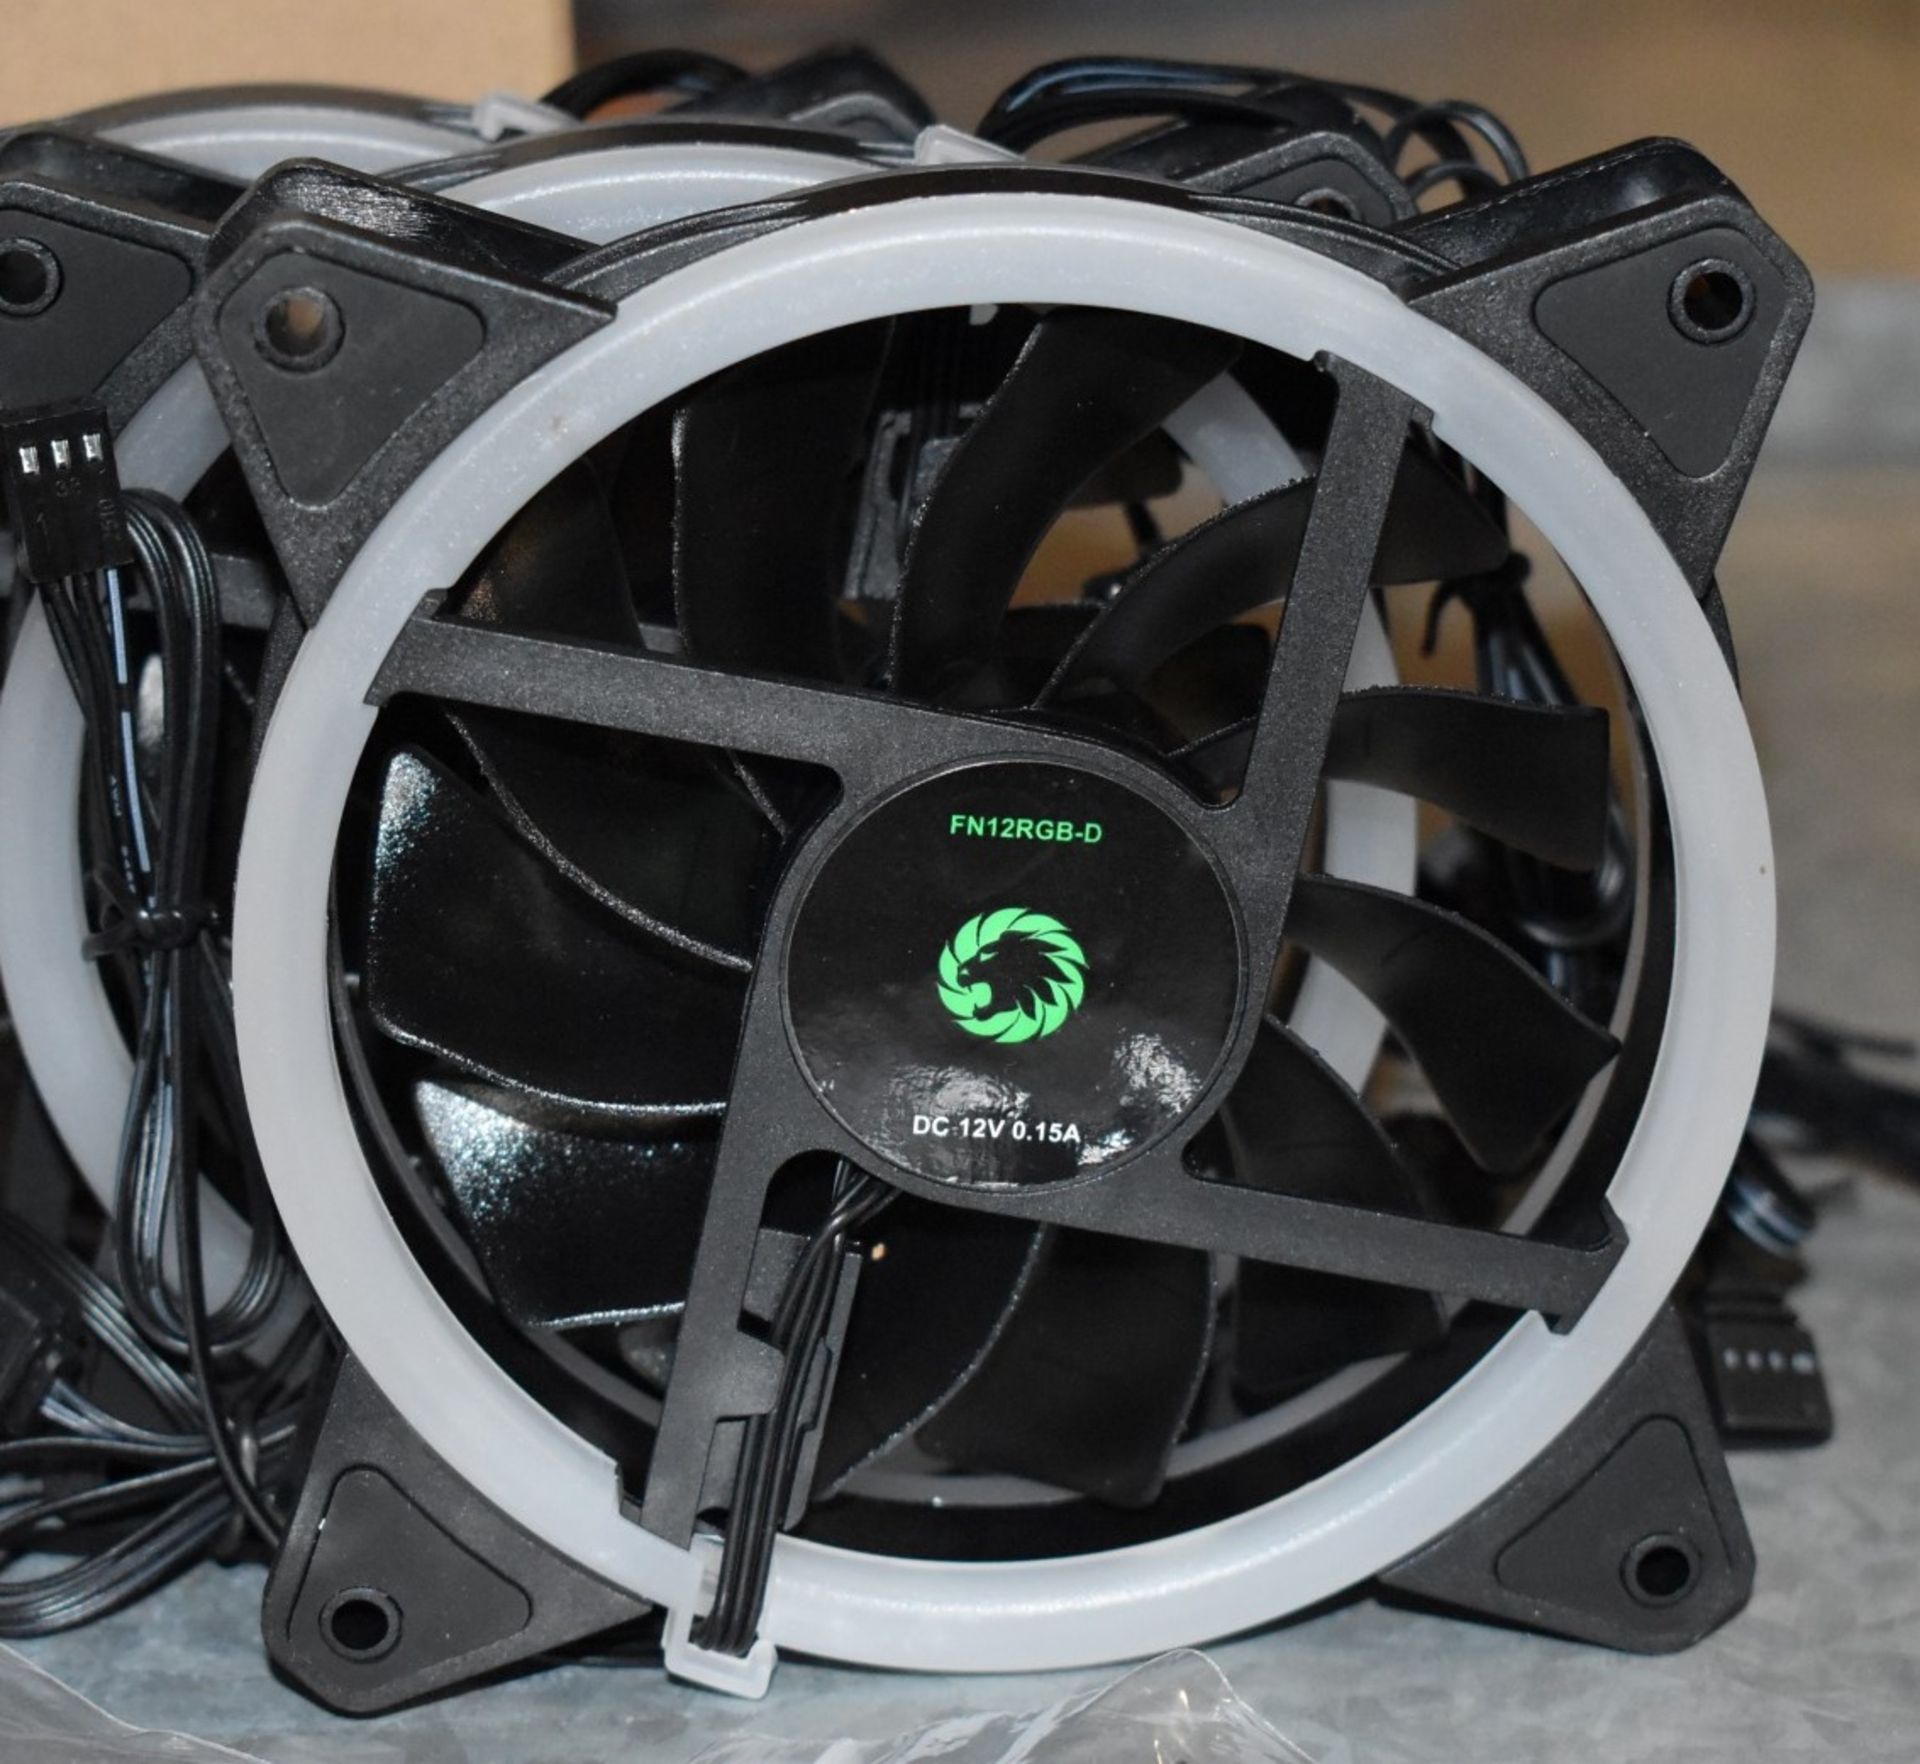 3 x GameMax LED Fan Packs For PC Gaming Cases - Each Pack Includes 3 x 120mm LED Case Fans - Image 3 of 8